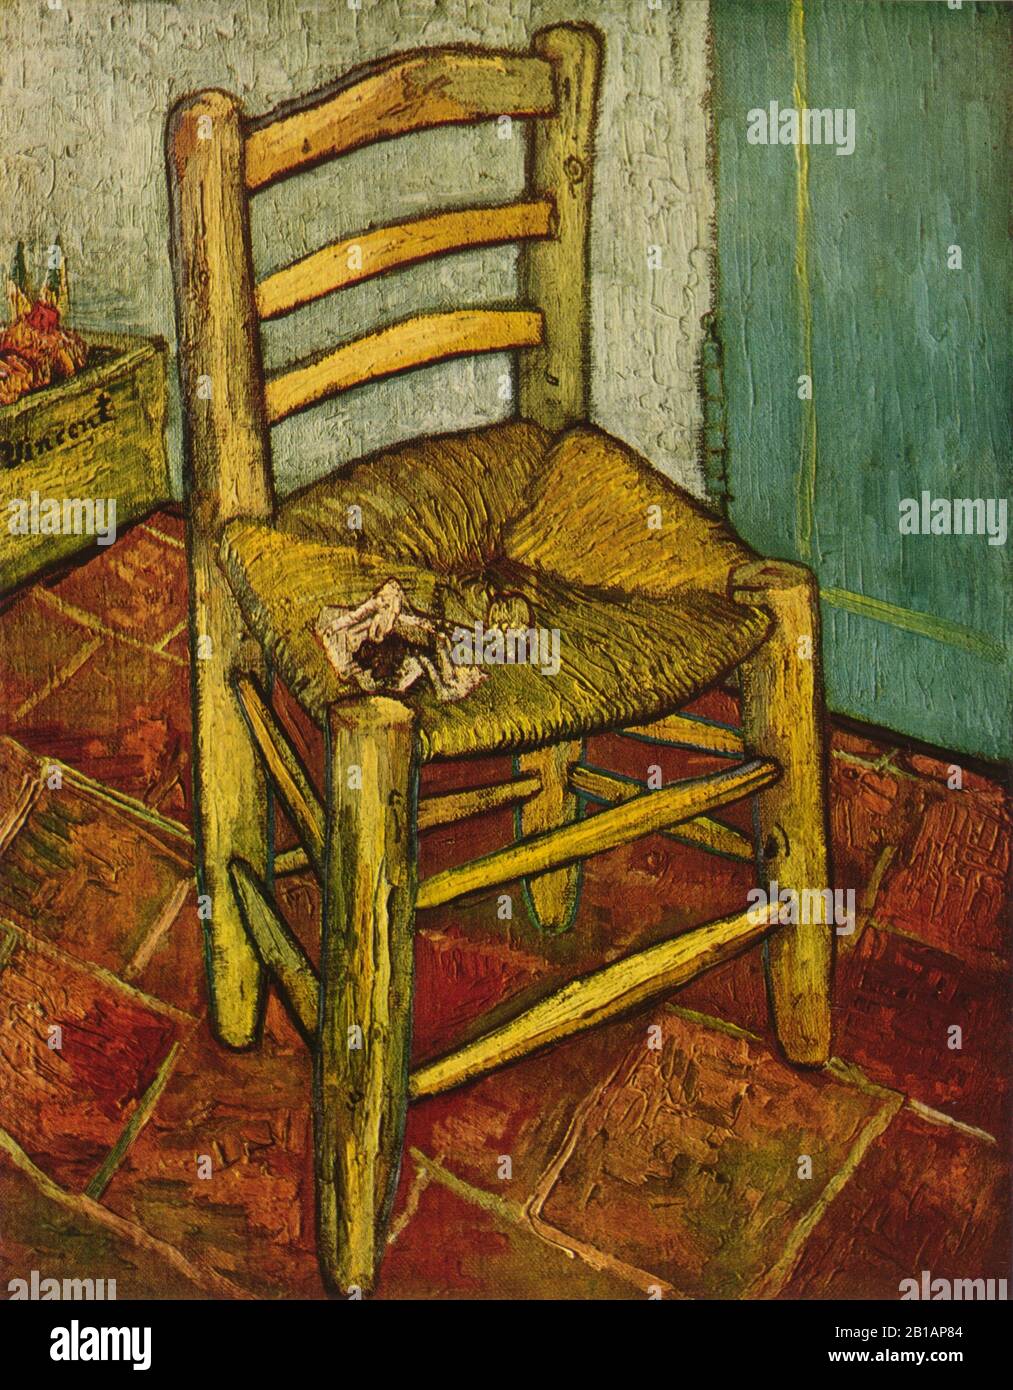 Van Gogh's Chair, 1889 - painting by Vincent van Gogh - Very high resolution and quality image Stock Photo